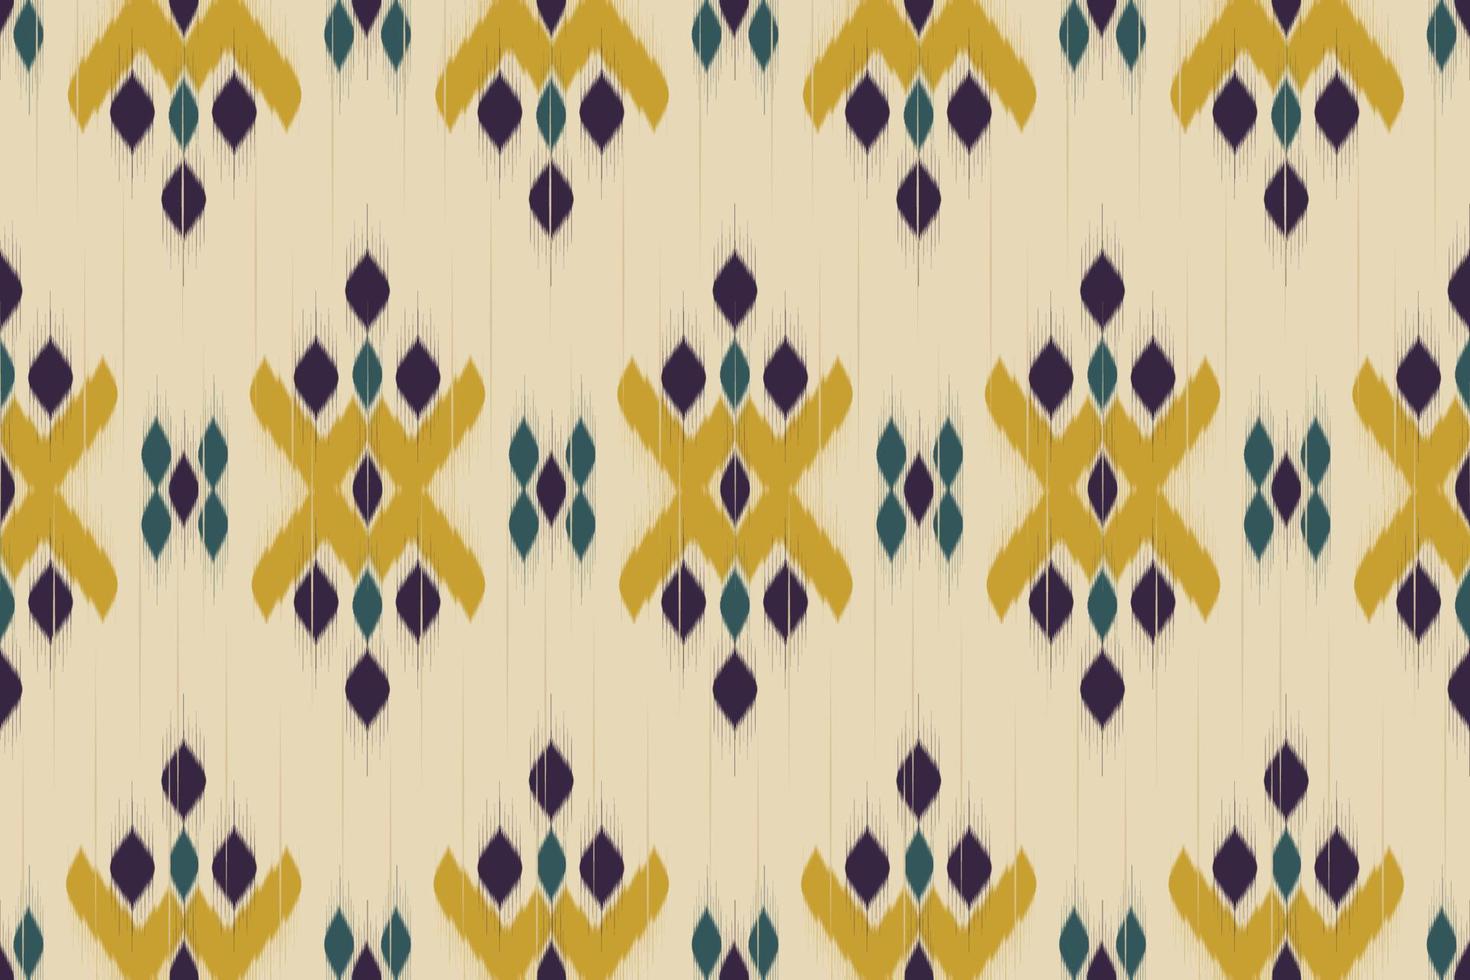 Ikat ethnic Indian seamless pattern. Design for background, wallpaper, vector illustration, fabric, clothing, batik, carpet, embroidery.